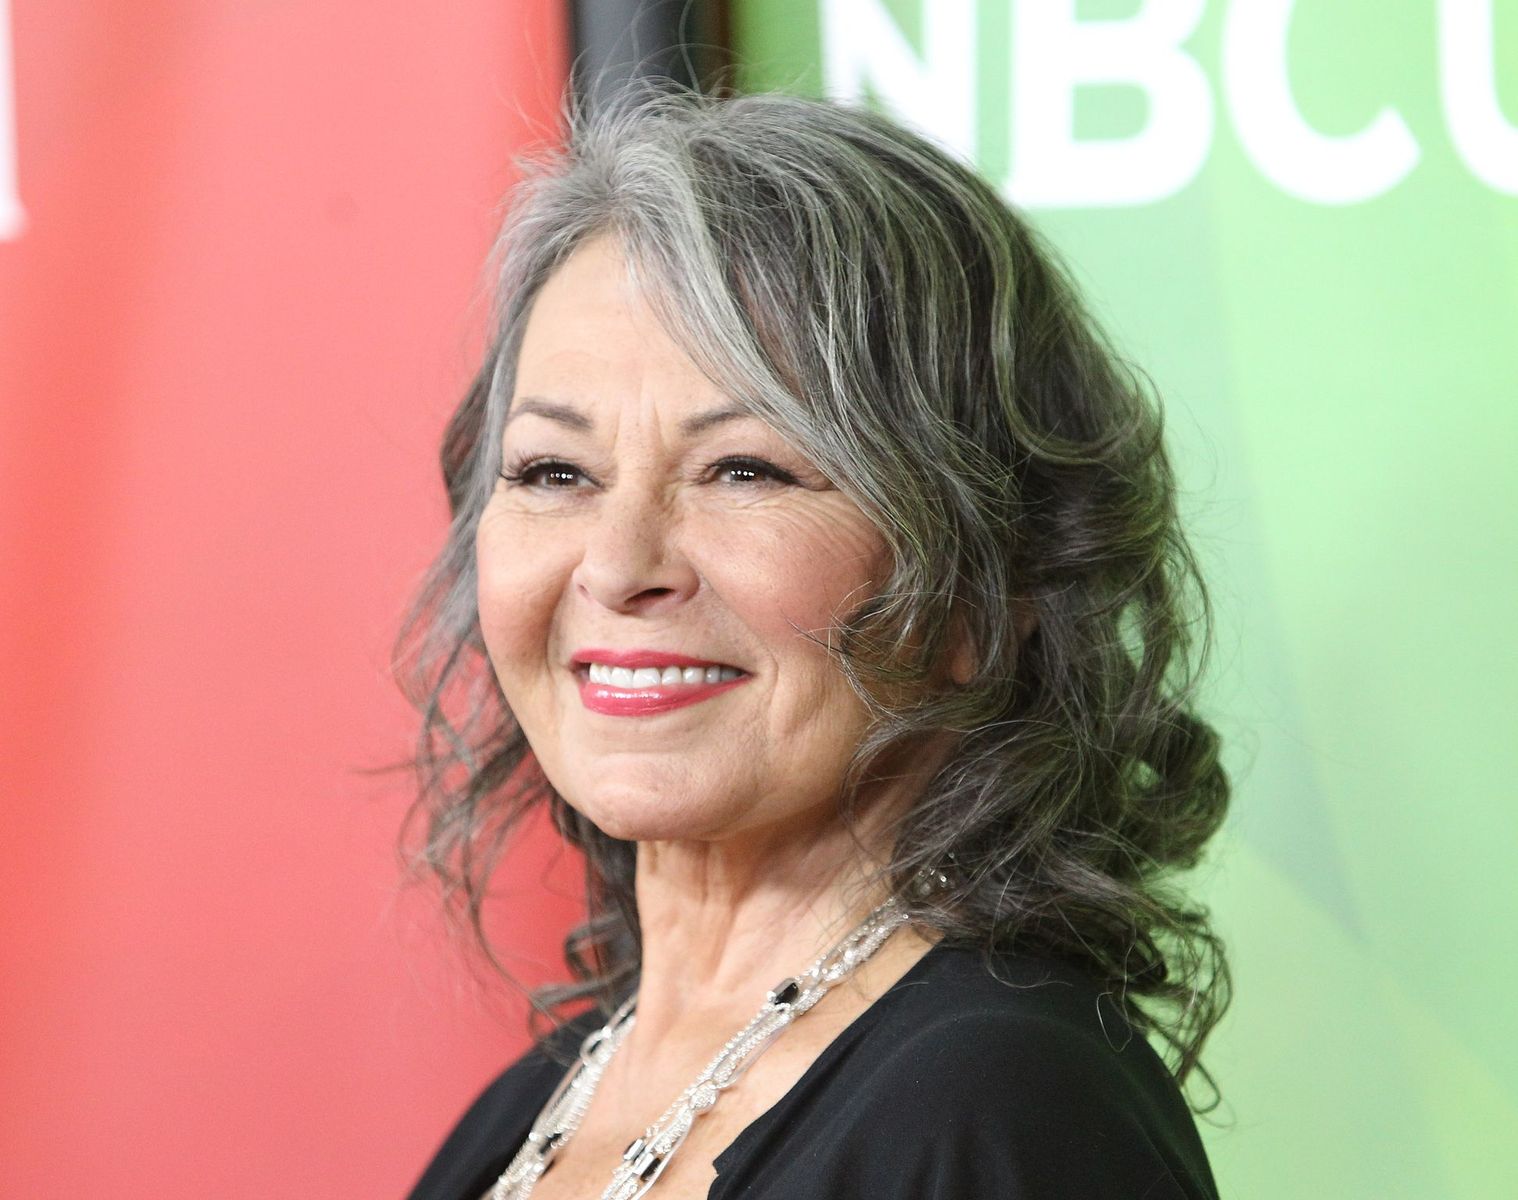 Roseanne Barr at the NBCUniversal's Summer Press Day on April 8, 2014, in Pasadena, California. | Source: Getty Images